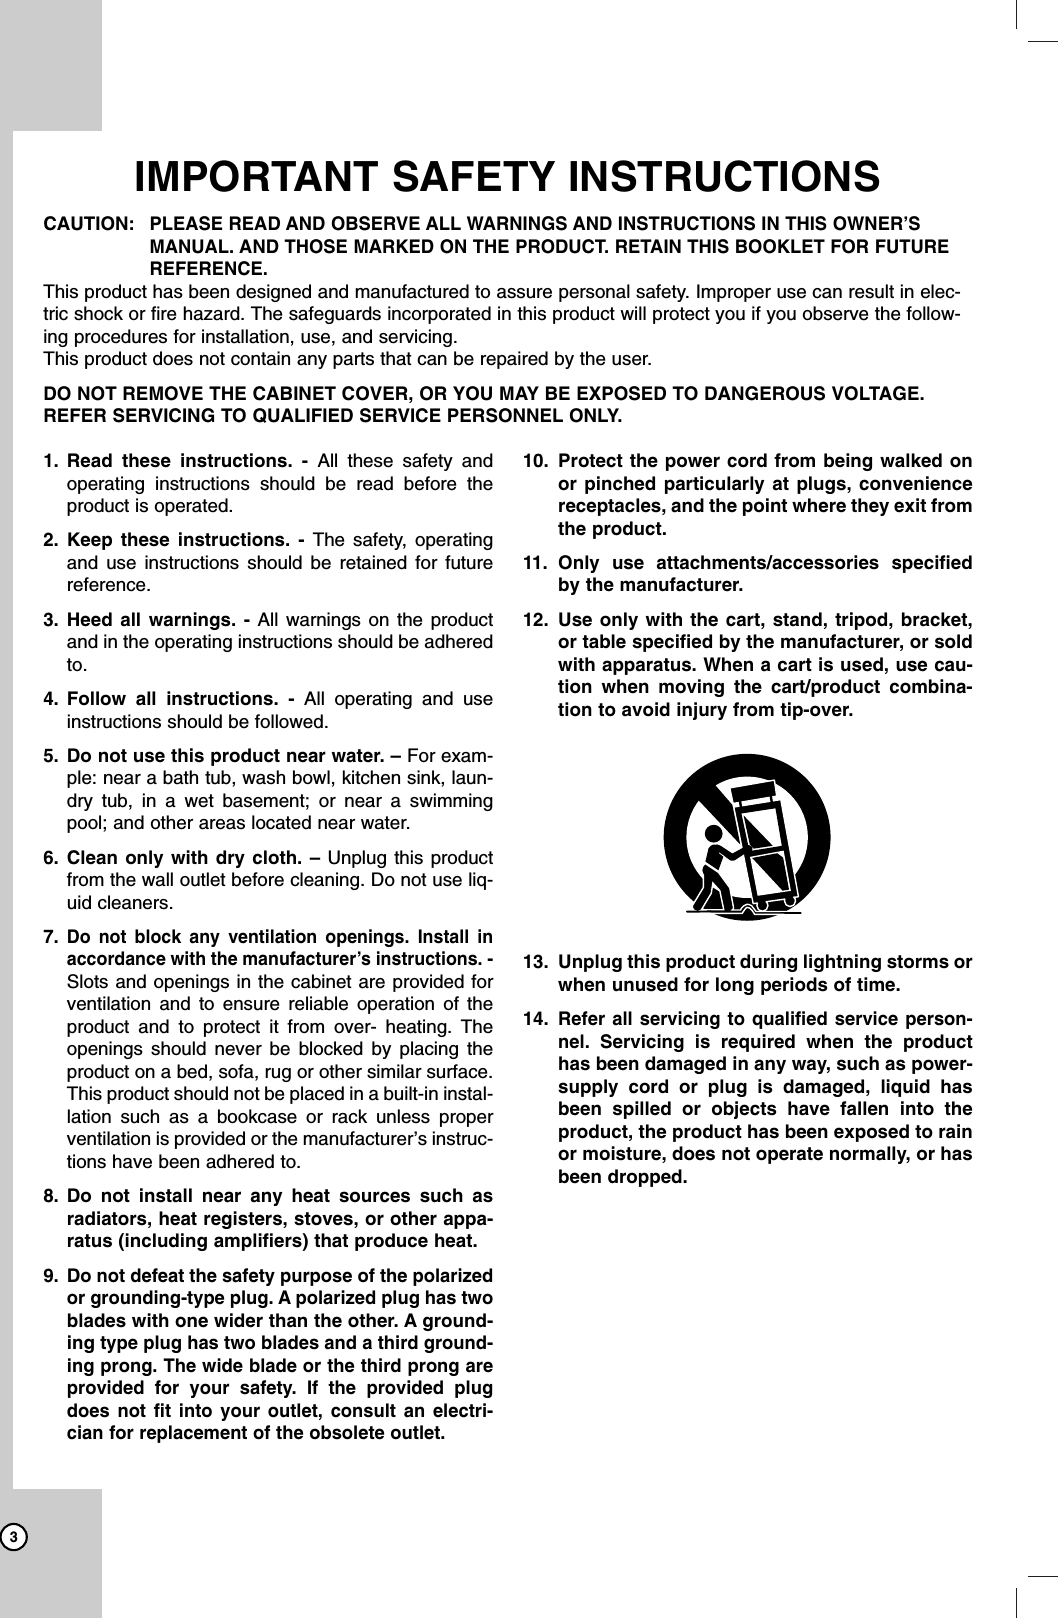 31. Read these instructions. - All these safety andoperating instructions should be read before theproduct is operated.2. Keep these instructions. - The safety, operatingand use instructions should be retained for futurereference.3. Heed all warnings. - All warnings on the productand in the operating instructions should be adheredto.4. Follow all instructions. - All operating and useinstructions should be followed.5. Do not use this product near water. – For exam-ple: near a bath tub, wash bowl, kitchen sink, laun-dry tub, in a wet basement; or near a swimmingpool; and other areas located near water.6. Clean only with dry cloth. – Unplug this productfrom the wall outlet before cleaning. Do not use liq-uid cleaners.7.Do not block any ventilation openings. Install inaccordance with the manufacturer’s instructions. -Slots and openings in the cabinet are provided forventilation and to ensure reliable operation of theproduct and to protect it from over- heating. Theopenings should never be blocked by placing theproduct on a bed, sofa, rug or other similar surface.This product should not be placed in a built-in instal-lation such as a bookcase or rack unless properventilation is provided or the manufacturer’s instruc-tions have been adhered to.8. Do not install near any heat sources such asradiators, heat registers, stoves, or other appa-ratus (including amplifiers) that produce heat.9. Do not defeat the safety purpose of the polarizedor grounding-type plug. A polarized plug has twoblades with one wider than the other. A ground-ingtype plug has two blades and a third ground-ing prong. The wide blade or the third prong areprovided for your safety. If the provided plugdoes not fit into your outlet, consult an electri-cian for replacement of the obsolete outlet.10. Protect the power cord from being walked onor pinched particularly at plugs, conveniencereceptacles, and the point where they exit fromthe product.11. Only use attachments/accessories specifiedby the manufacturer.12. Use only with the cart, stand, tripod, bracket,or table specified by the manufacturer, or soldwith apparatus. When a cart is used, use cau-tion when moving the cart/product combina-tion to avoid injury from tip-over.13. Unplug this product during lightning storms orwhen unused for long periods of time.14.Refer all servicing to qualified service person-nel.Servicing is required when the producthas been damaged in any way, such as power-supply cord or plug is damaged, liquid hasbeen spilled or objects have fallen into theproduct, the product has been exposed to rainor moisture, does not operate normally, or hasbeen dropped.IMPORTANT SAFETY INSTRUCTIONSCAUTION:PLEASE READ AND OBSERVE ALL WARNINGS AND INSTRUCTIONS IN THIS OWNER’SMANUAL. AND THOSE MARKED ON THE PRODUCT. RETAIN THIS BOOKLET FOR FUTUREREFERENCE.This product has been designed and manufactured to assure personal safety. Improper use can result in elec-tric shock or fire hazard. The safeguards incorporated in this product will protect you if you observe the follow-ing procedures for installation, use, and servicing.This product does not contain any parts that can be repaired by the user.DO NOT REMOVE THE CABINET COVER, OR YOU MAY BE EXPOSED TO DANGEROUS VOLTAGE.REFER SERVICING TO QUALIFIED SERVICE PERSONNEL ONLY.